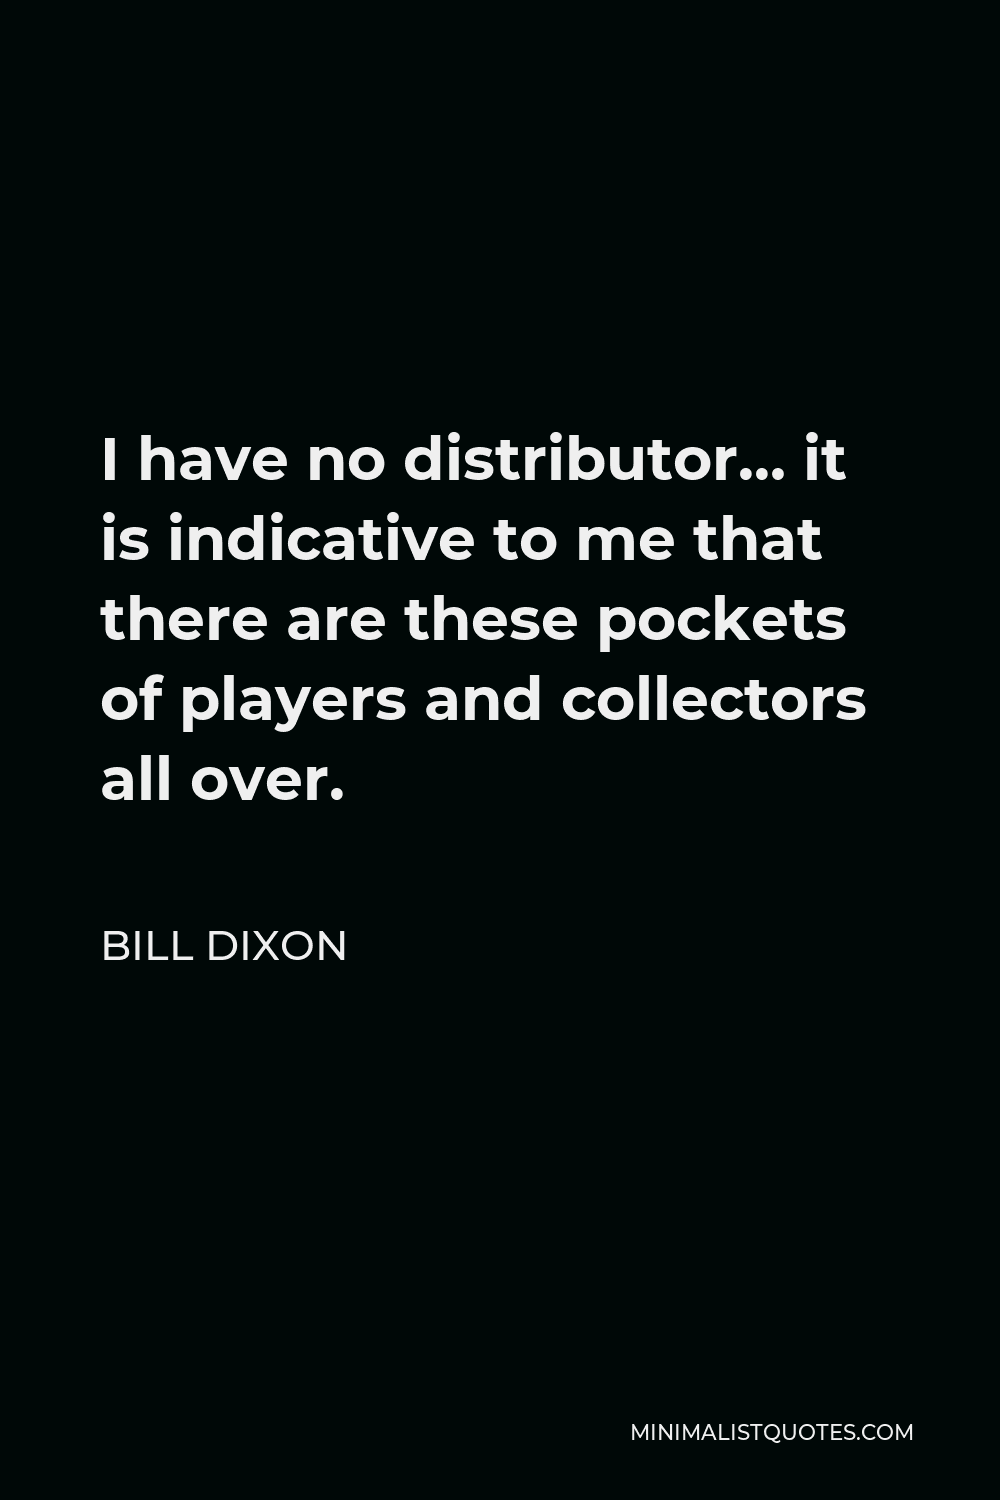 Bill Dixon Quote - I have no distributor… it is indicative to me that there are these pockets of players and collectors all over.